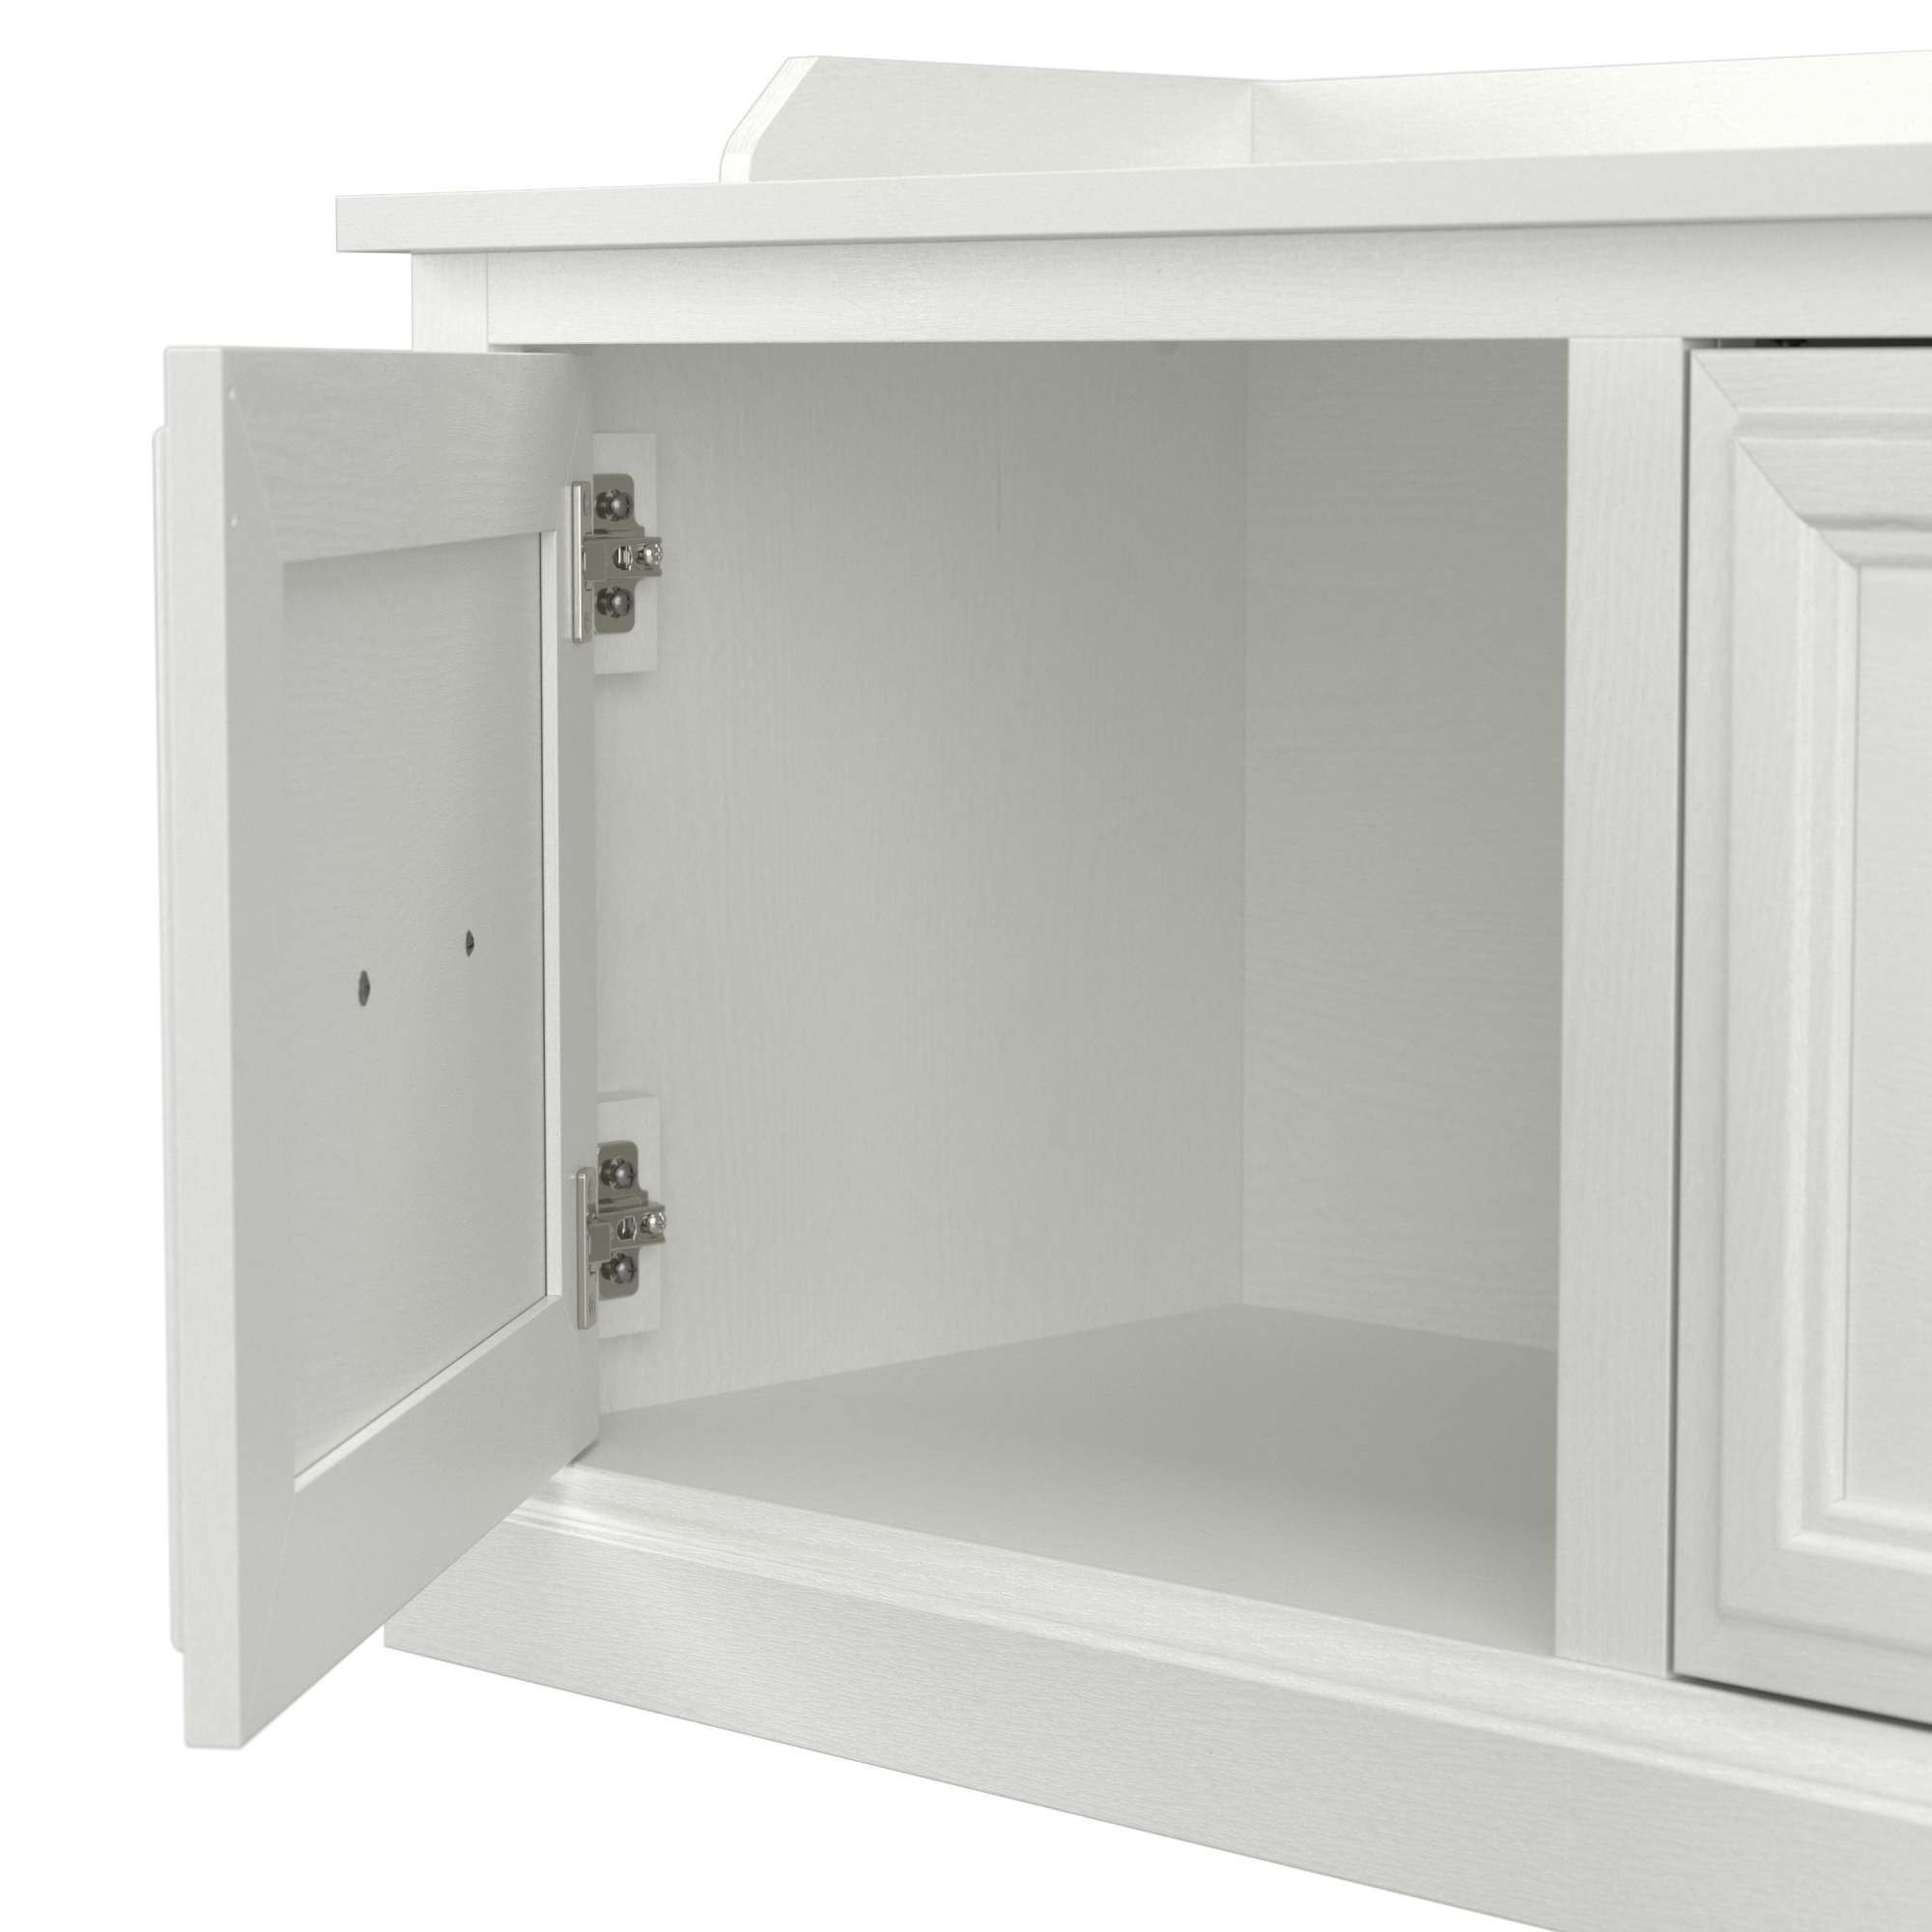 Kathy Ireland Home by Bush Furniture Woodland 40W Entryway Bench with Doors and Wall Mounted Coat Rack in White Ash